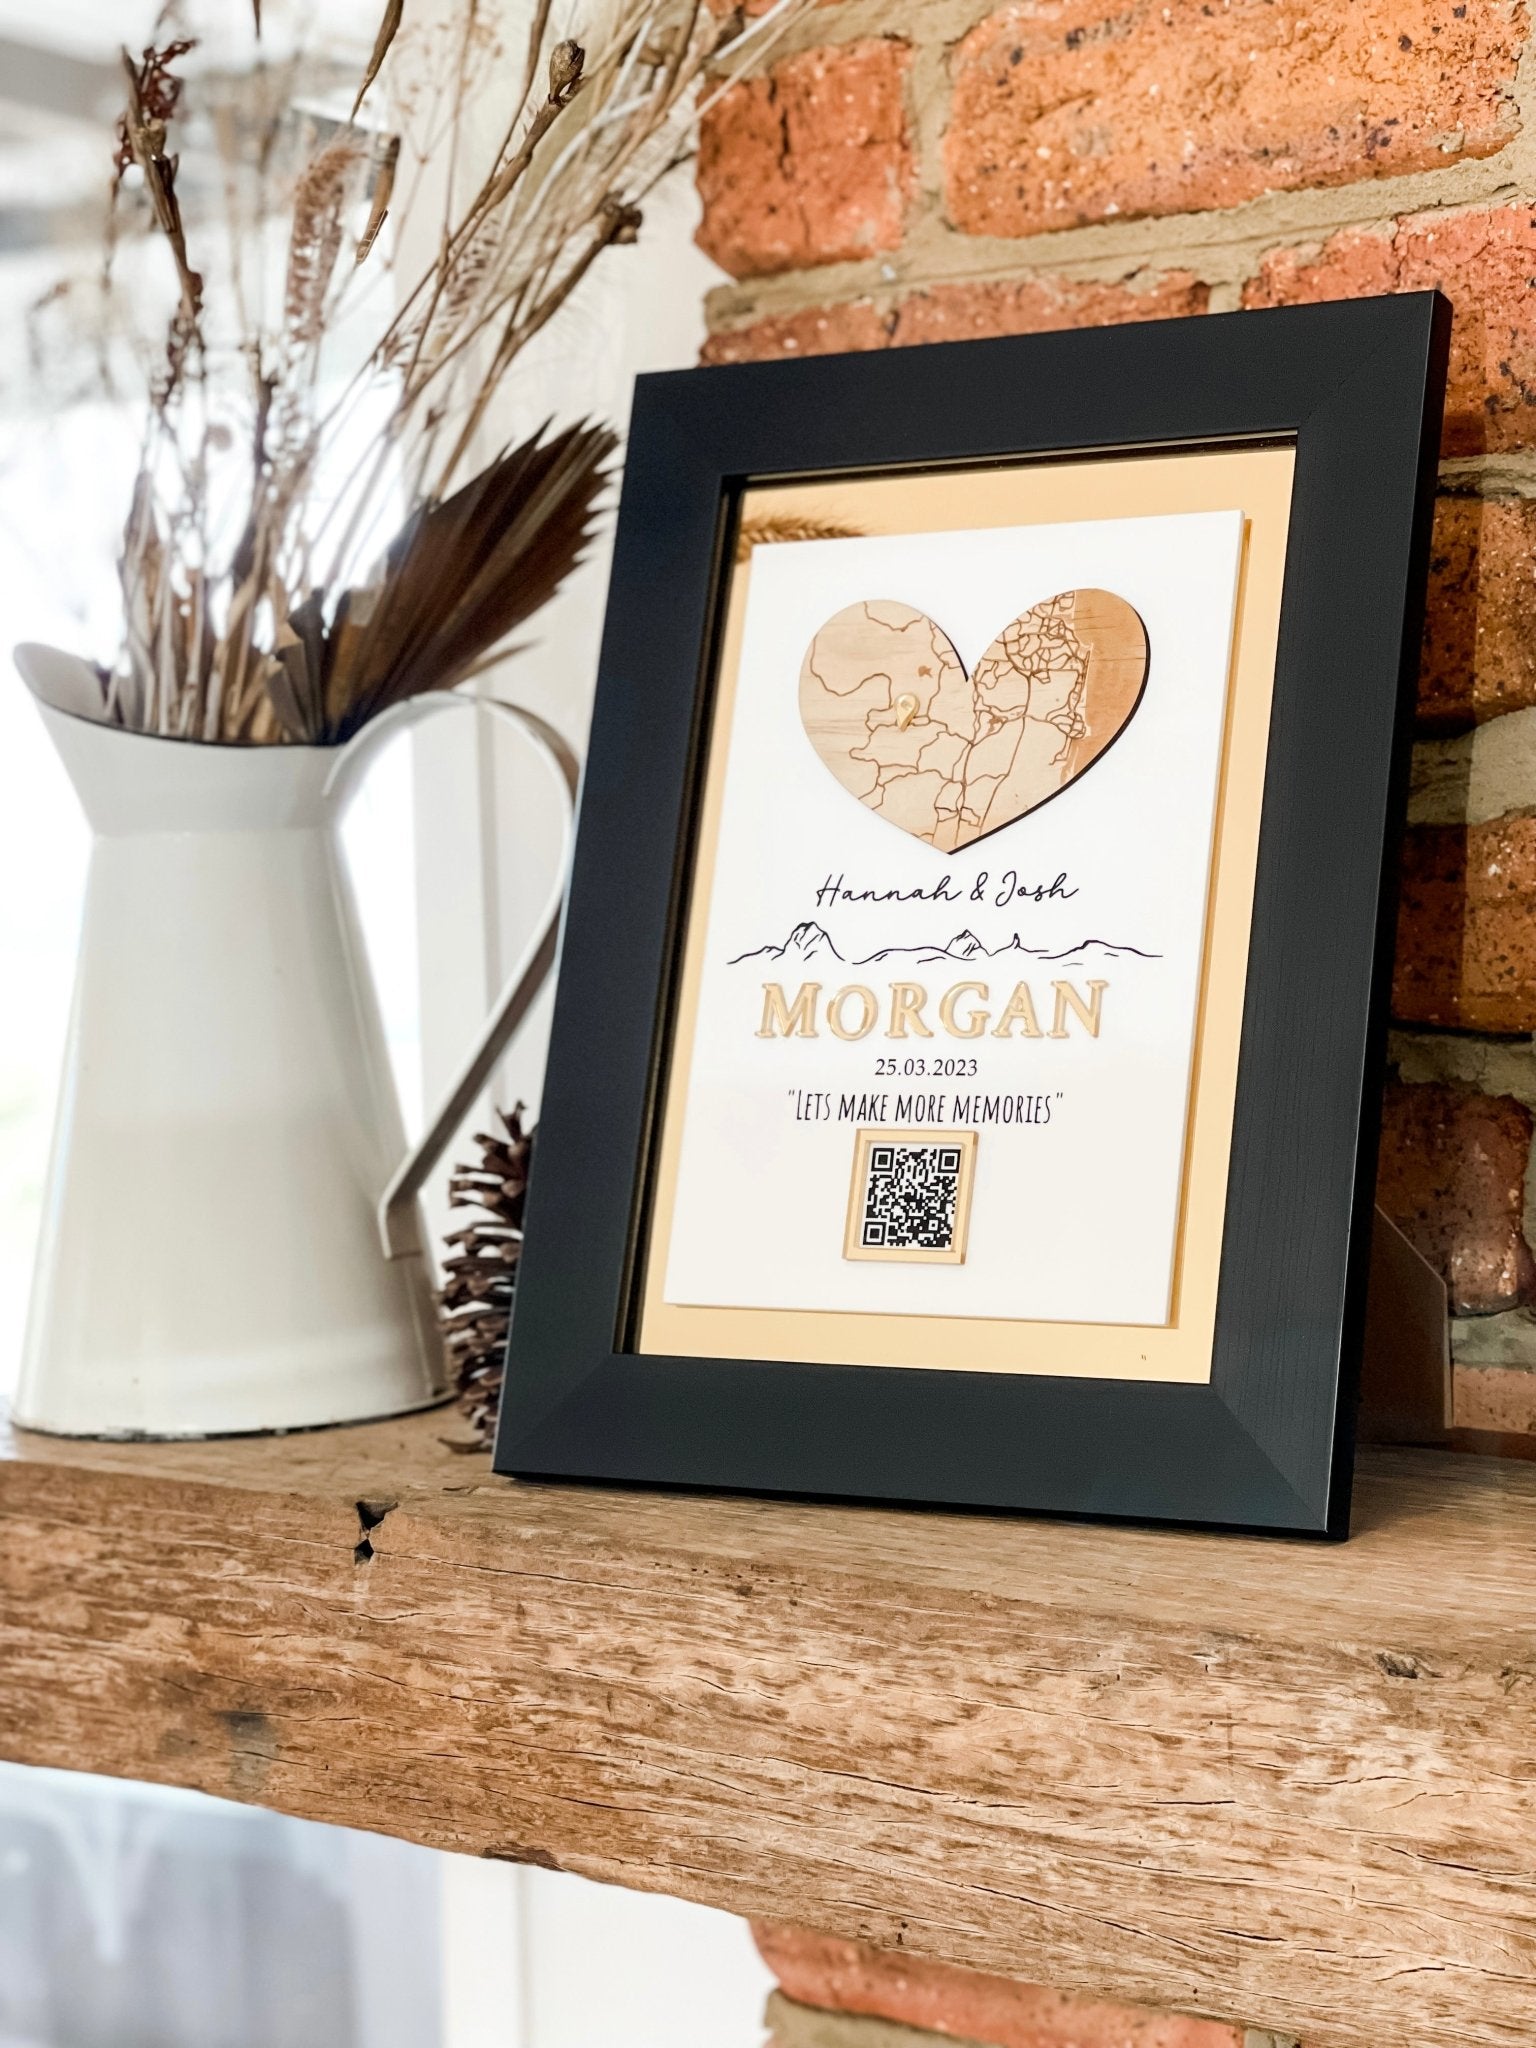 Framed Love Map with Gold Features - The Humble Gift Co.